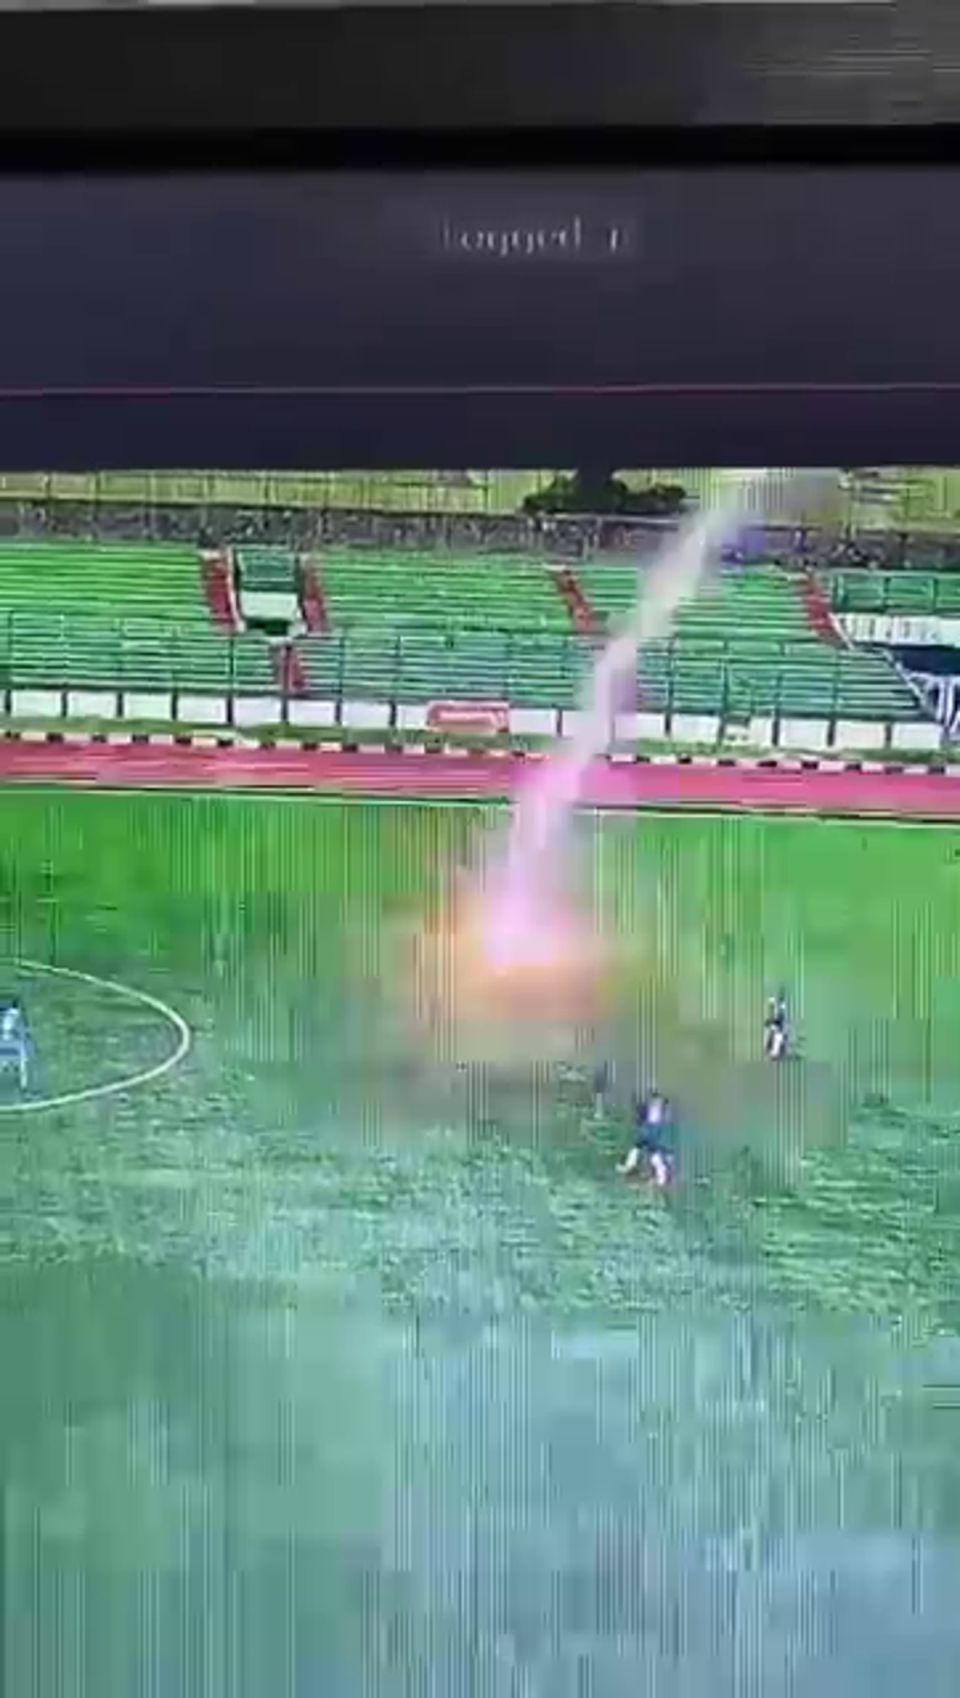 A video captured the moment a man was struck by lightning during a football match (Mojang Jajaka / YouTube)